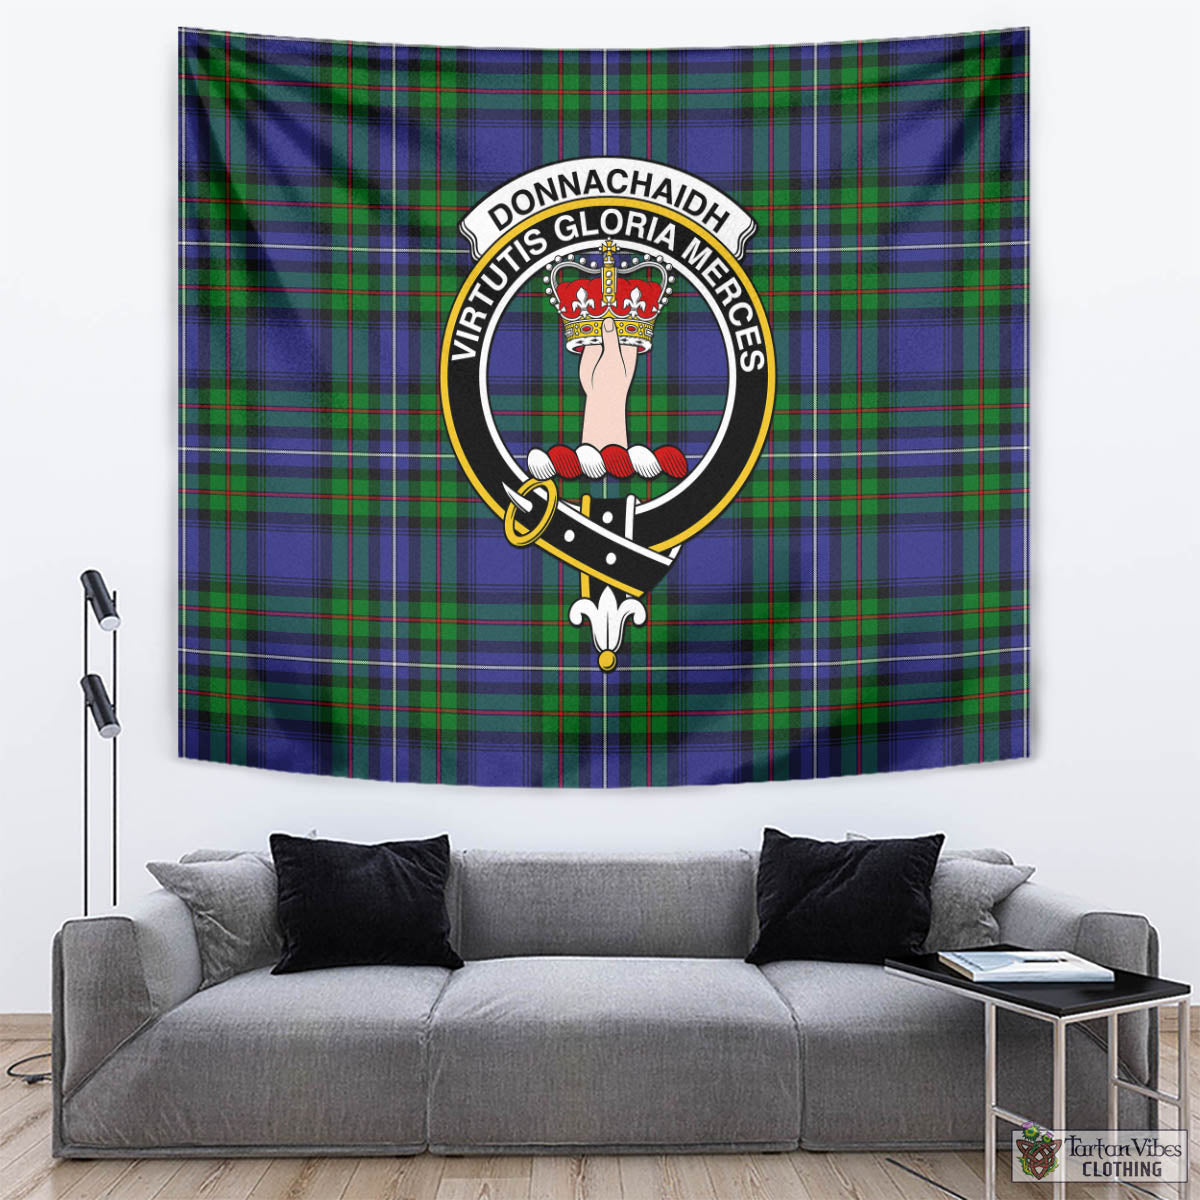 Tartan Vibes Clothing Donnachaidh Tartan Tapestry Wall Hanging and Home Decor for Room with Family Crest